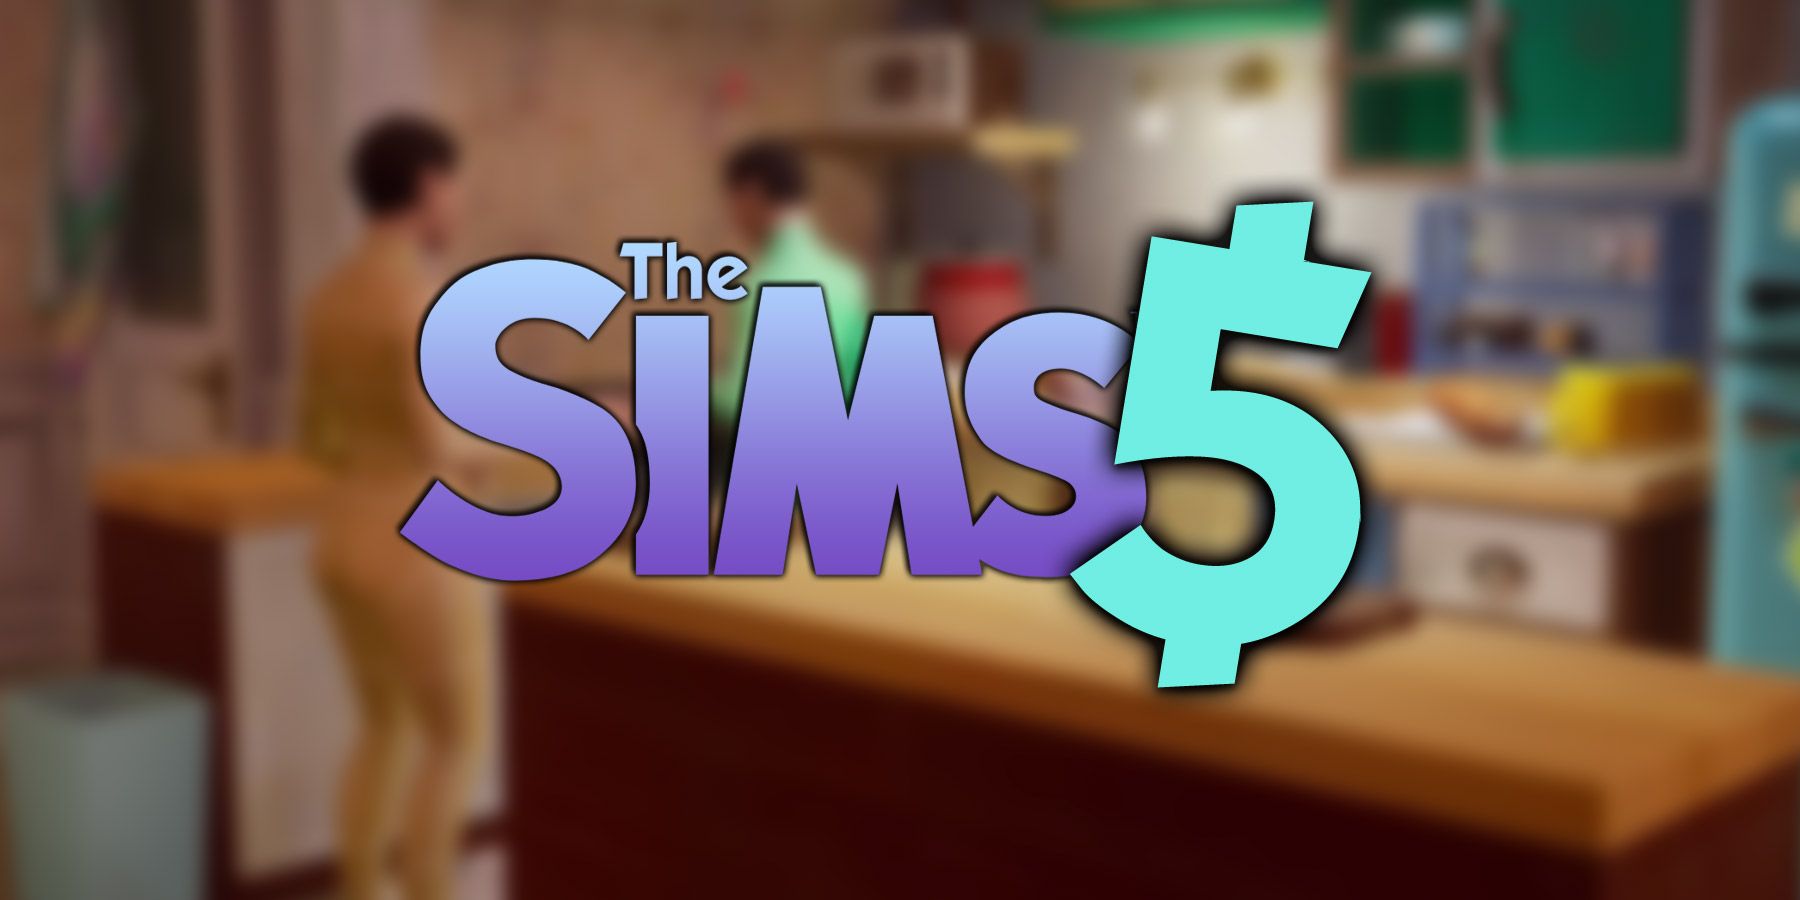 IGN on X: EA will seemingly make The Sims 5 a free to play game that  allows user generated content in a monetisation model similar to  Fortnite's, which lets players make their